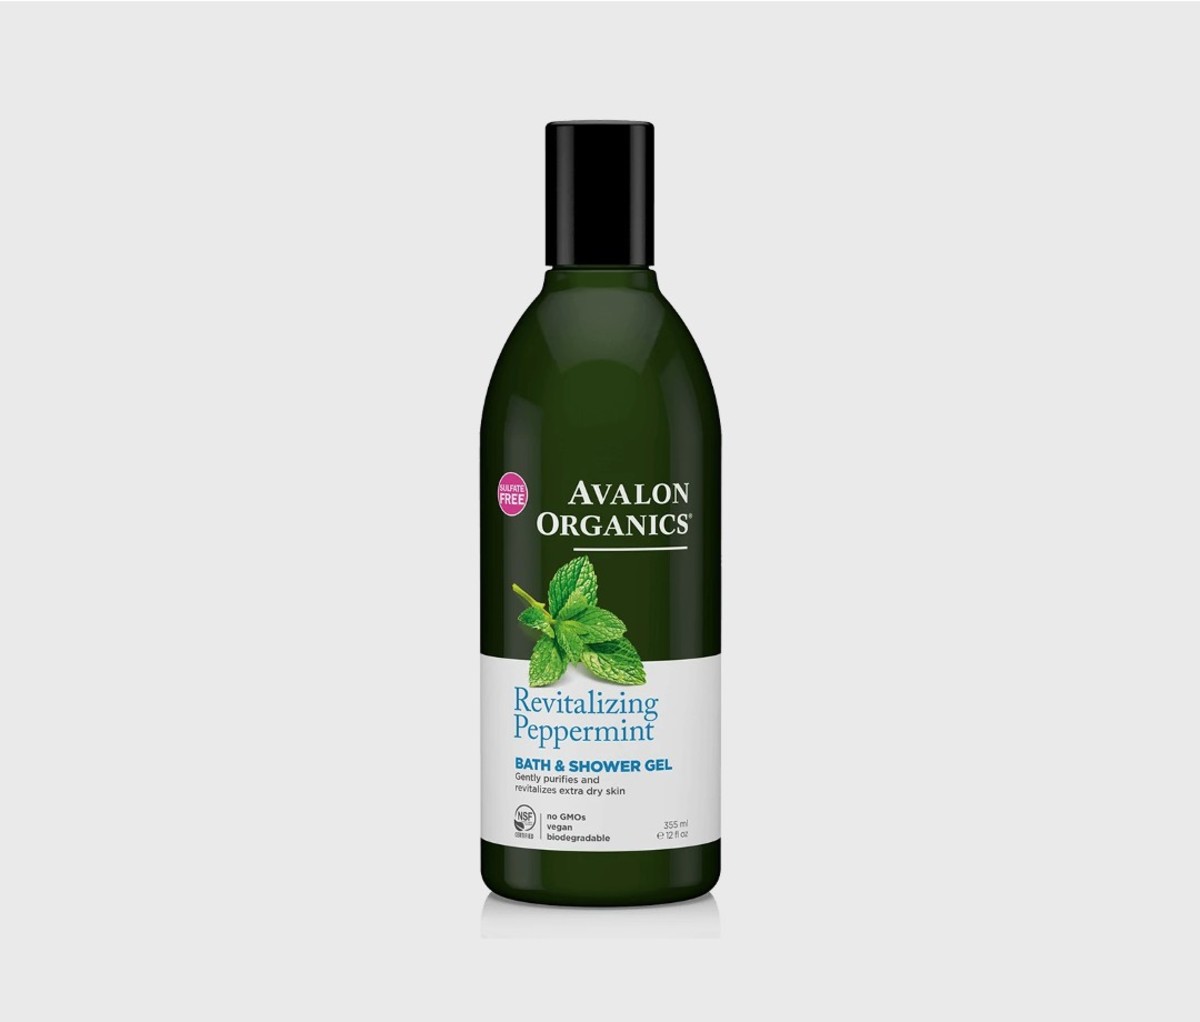 Revitalizing peppermint bath and shower gel from Avalon Organics